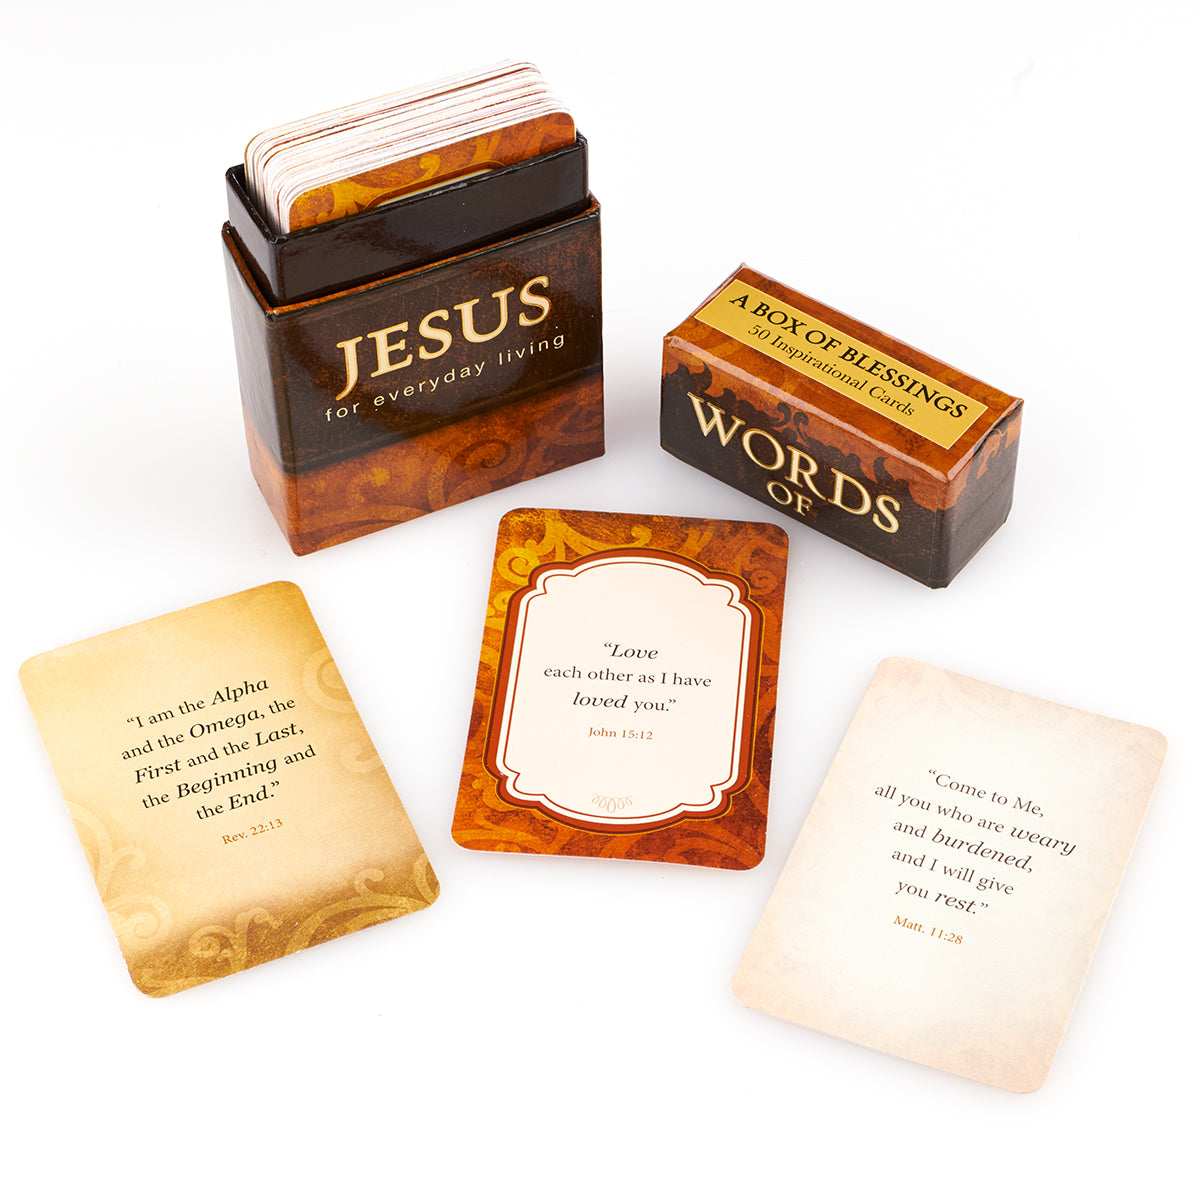 Words of Jesus Box of Blessings - The Christian Gift Company